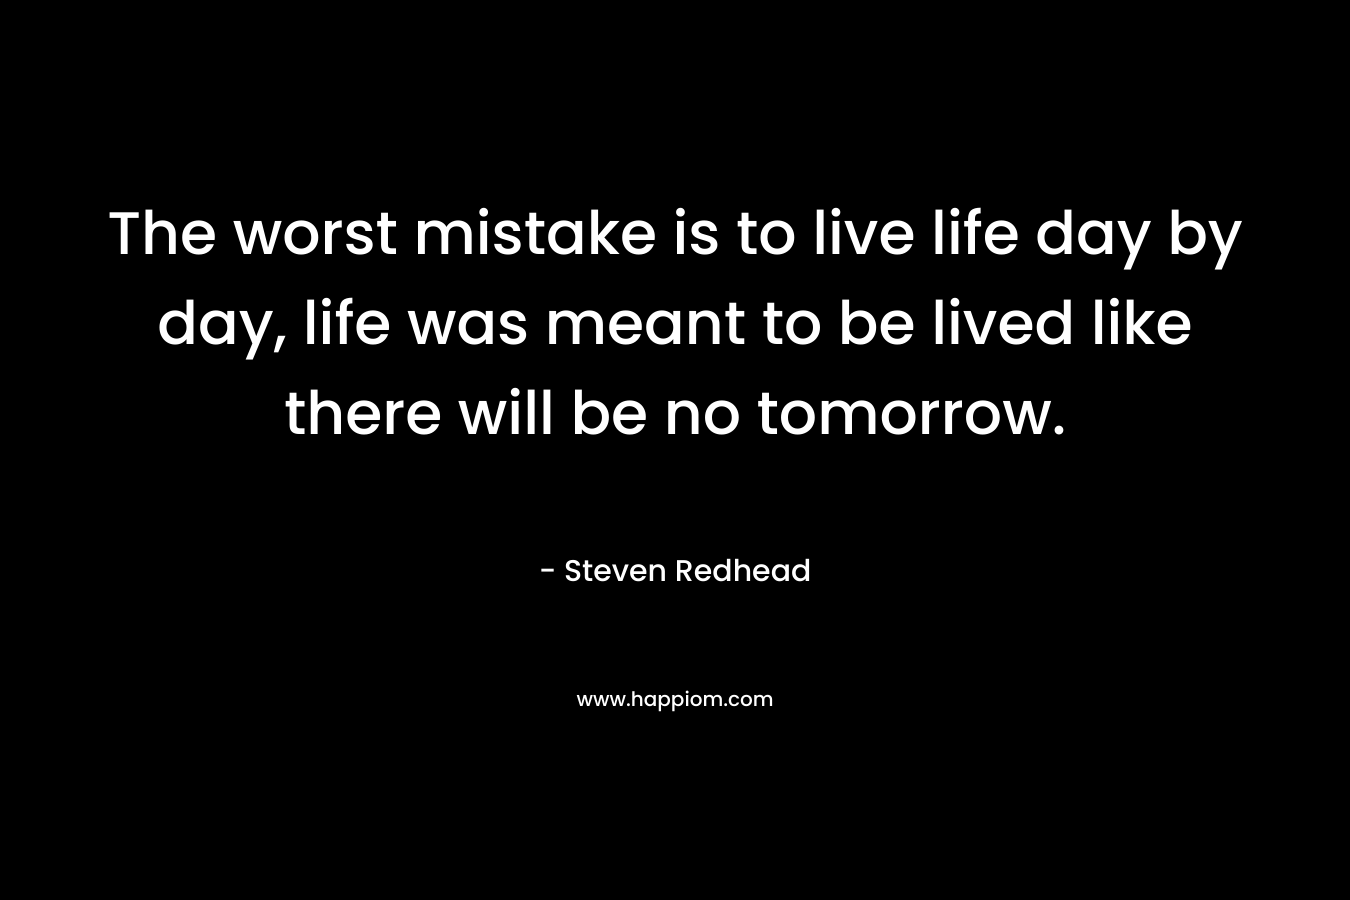 The worst mistake is to live life day by day, life was meant to be lived like there will be no tomorrow.